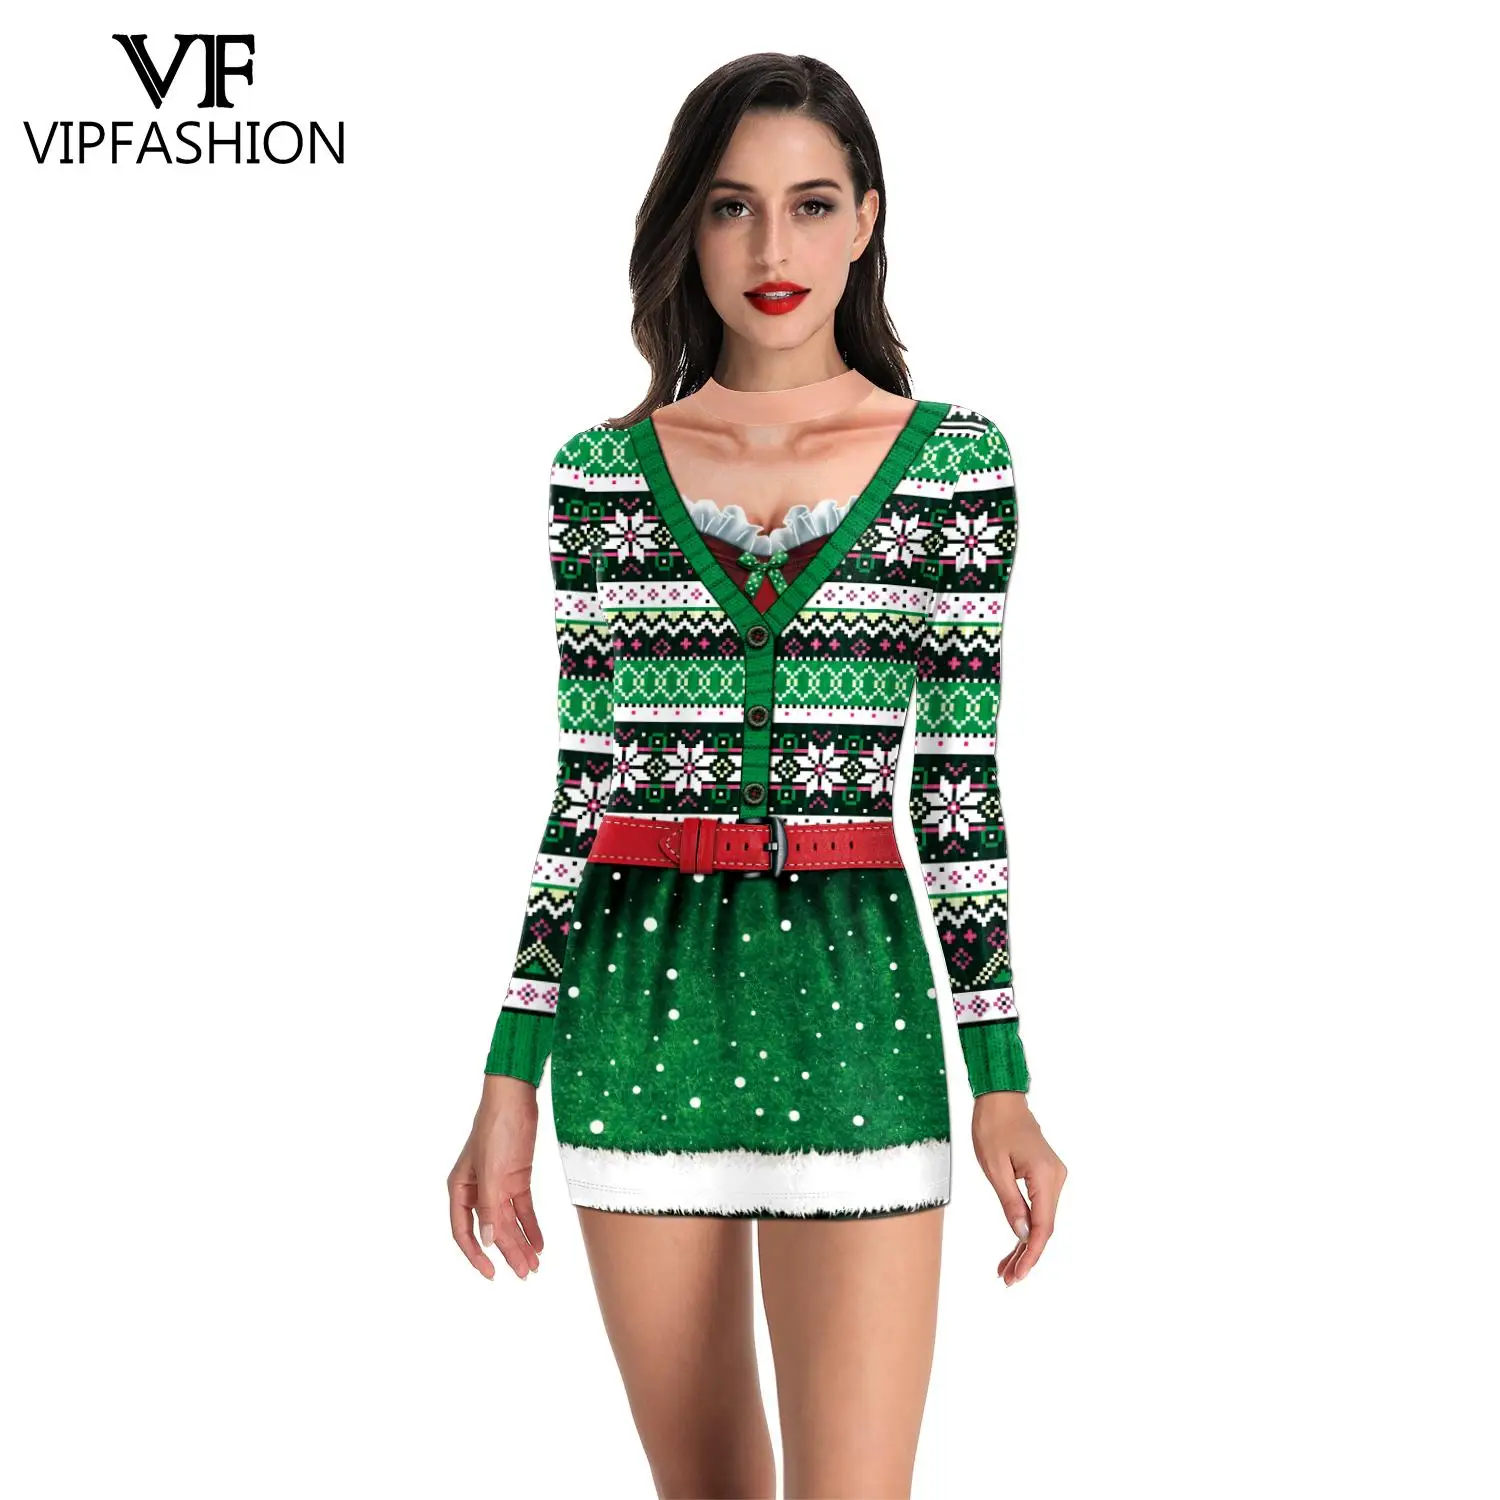 

VIP FASHION Ugly Christmas Santa Claus Pritned Women Sexy New Year Party Dresses Elegant Tunic Vestidos Casual Long Sleeves